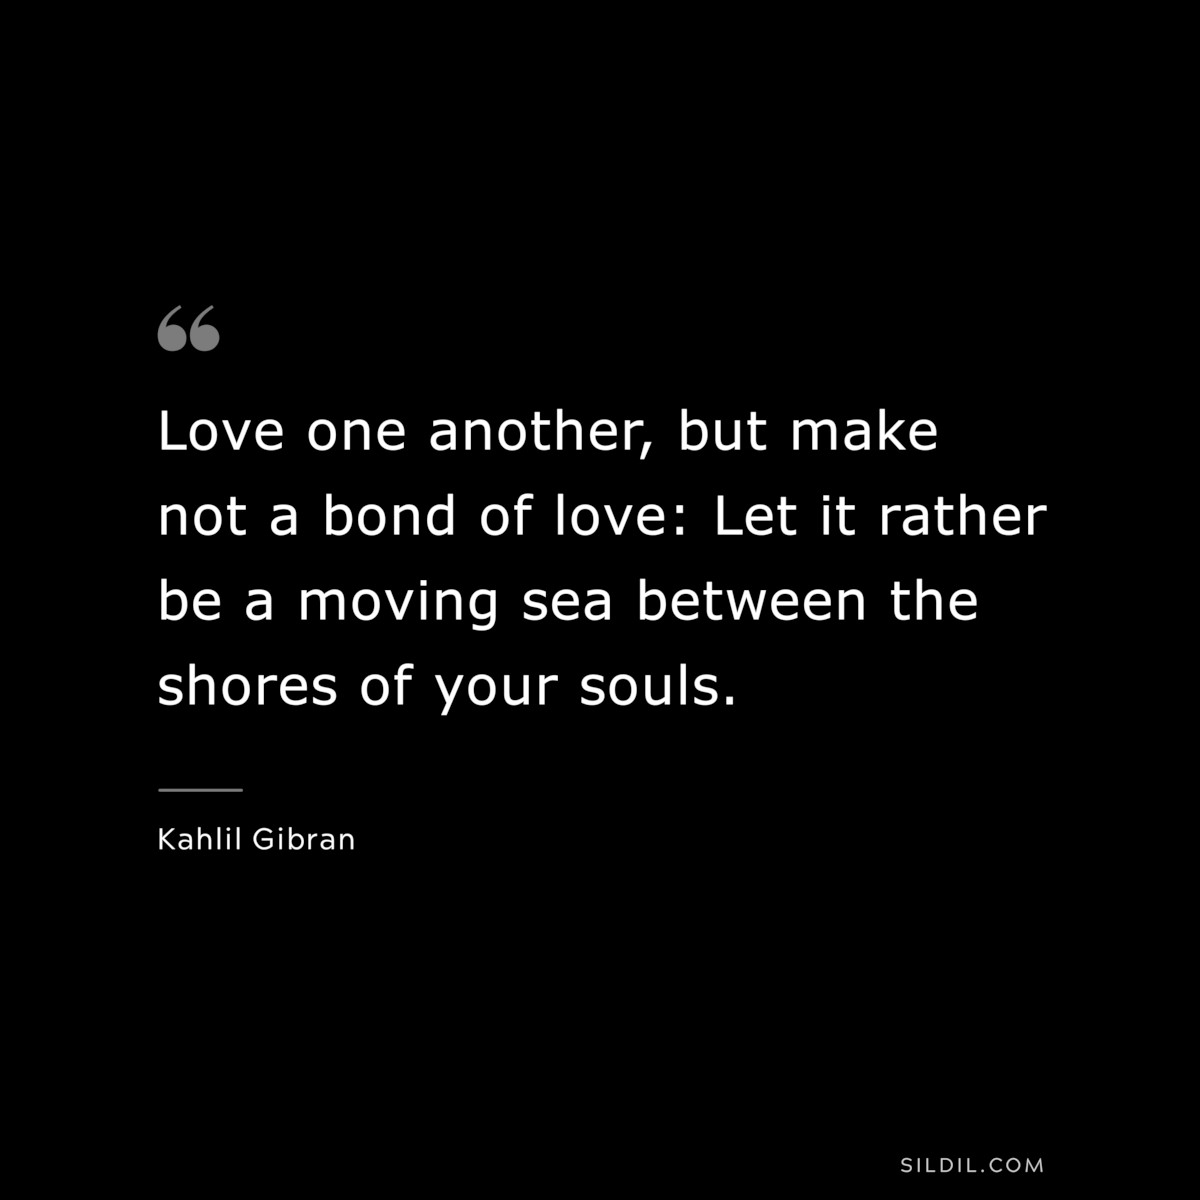 Love one another, but make not a bond of love: Let it rather be a moving sea between the shores of your souls. ― Kahlil Gibran